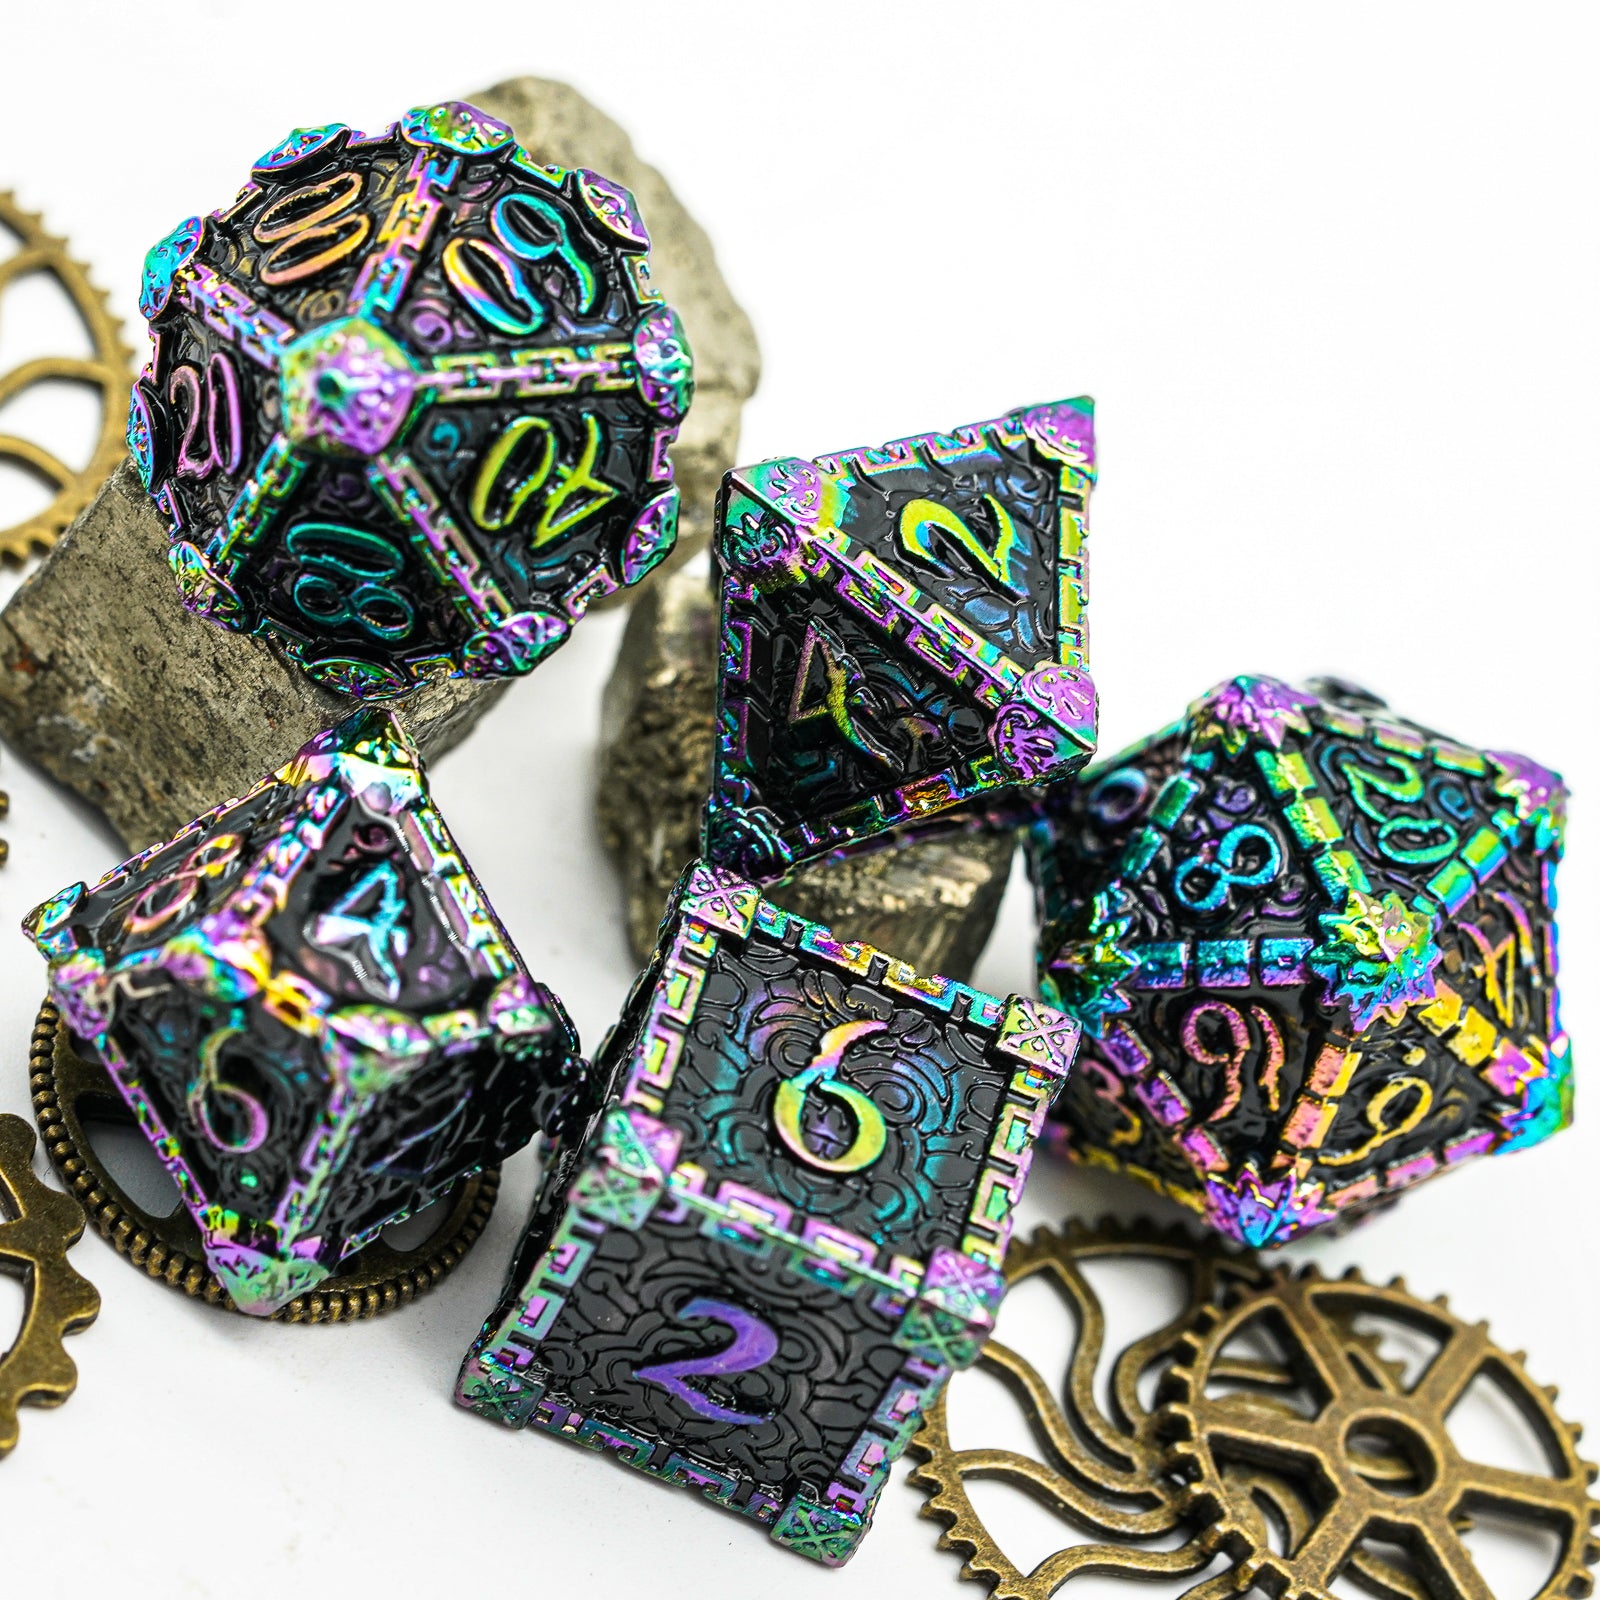 5 metal dice, rainbow on dark background, gears and stones in background